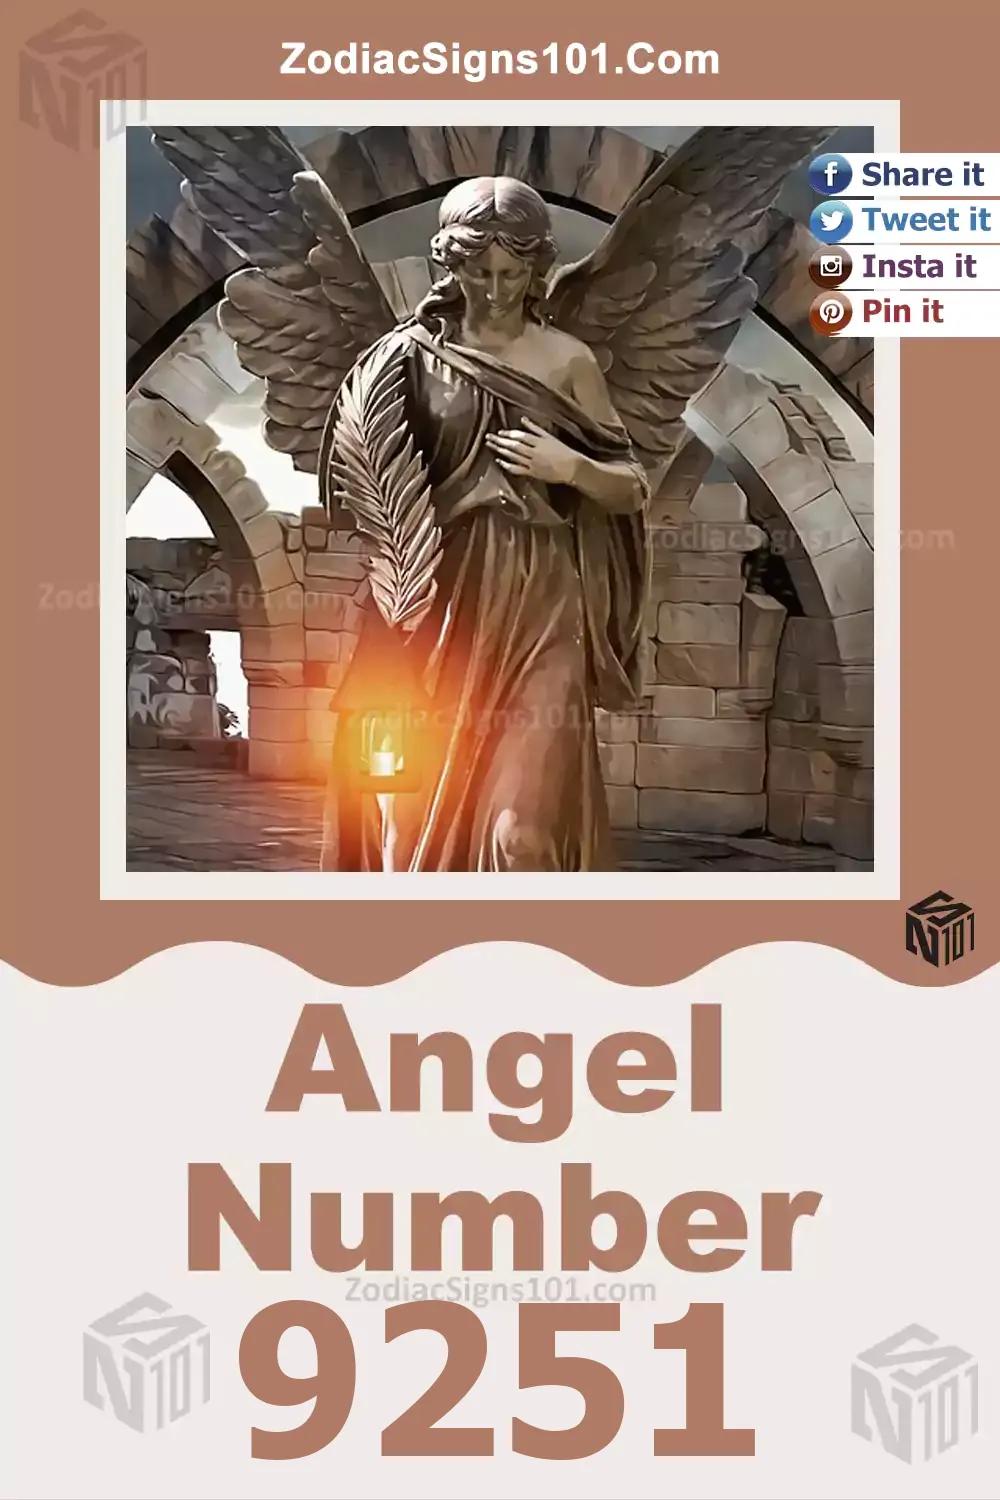 9251 Angel Number Meaning